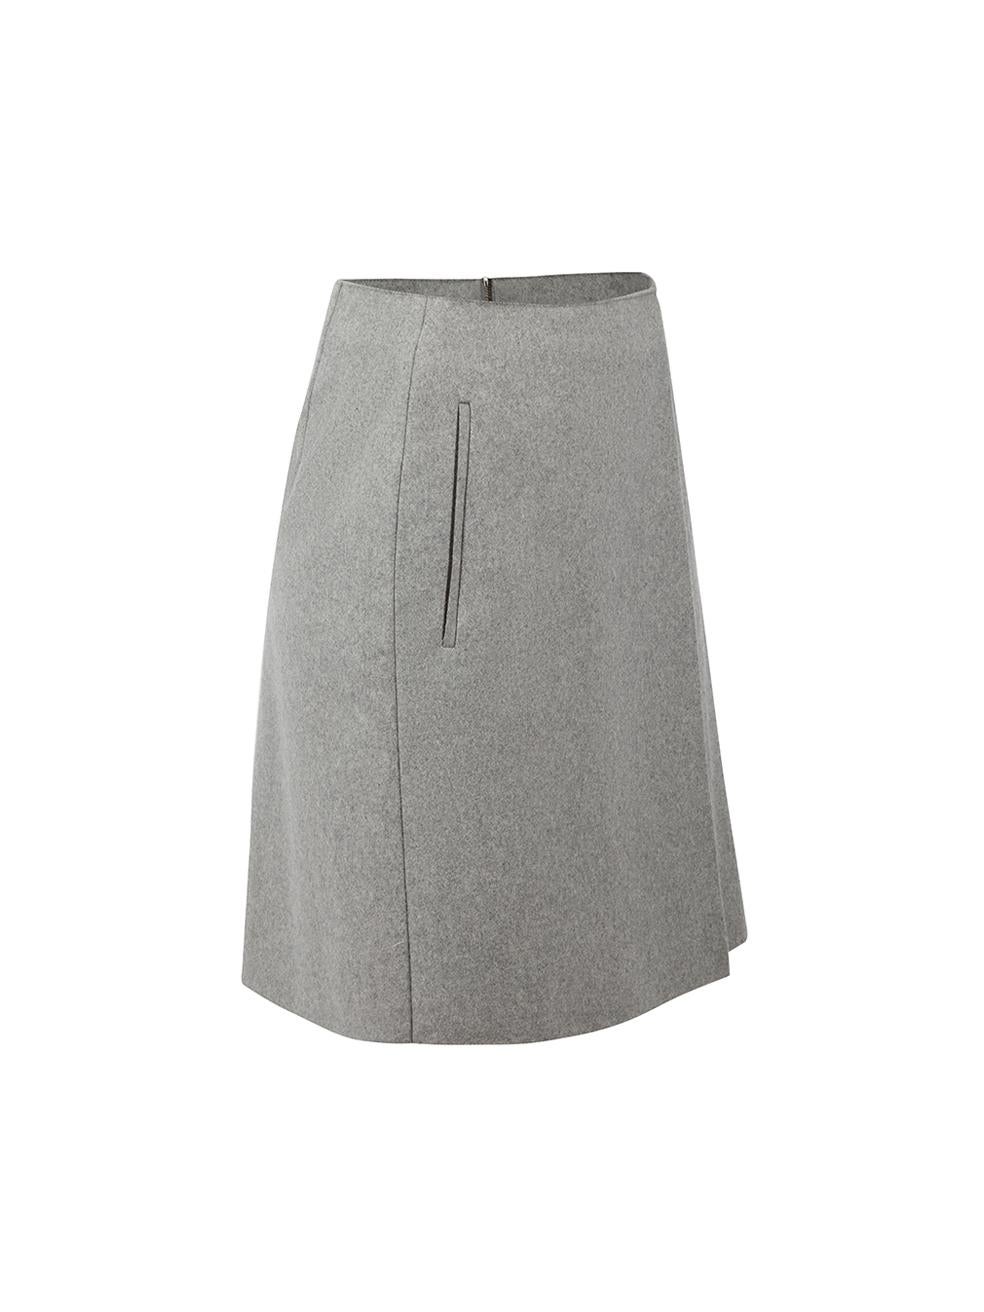 CONDITION is Never Worn. No visible wear to skirt is evident on this used Acne Studios designer resale item.



Details


Grey

Wool

Skirt

Pencil

Mini

Wrap detail

2x Side pockets

Back zip fastening





Made in Lithuania  



Composition

75%